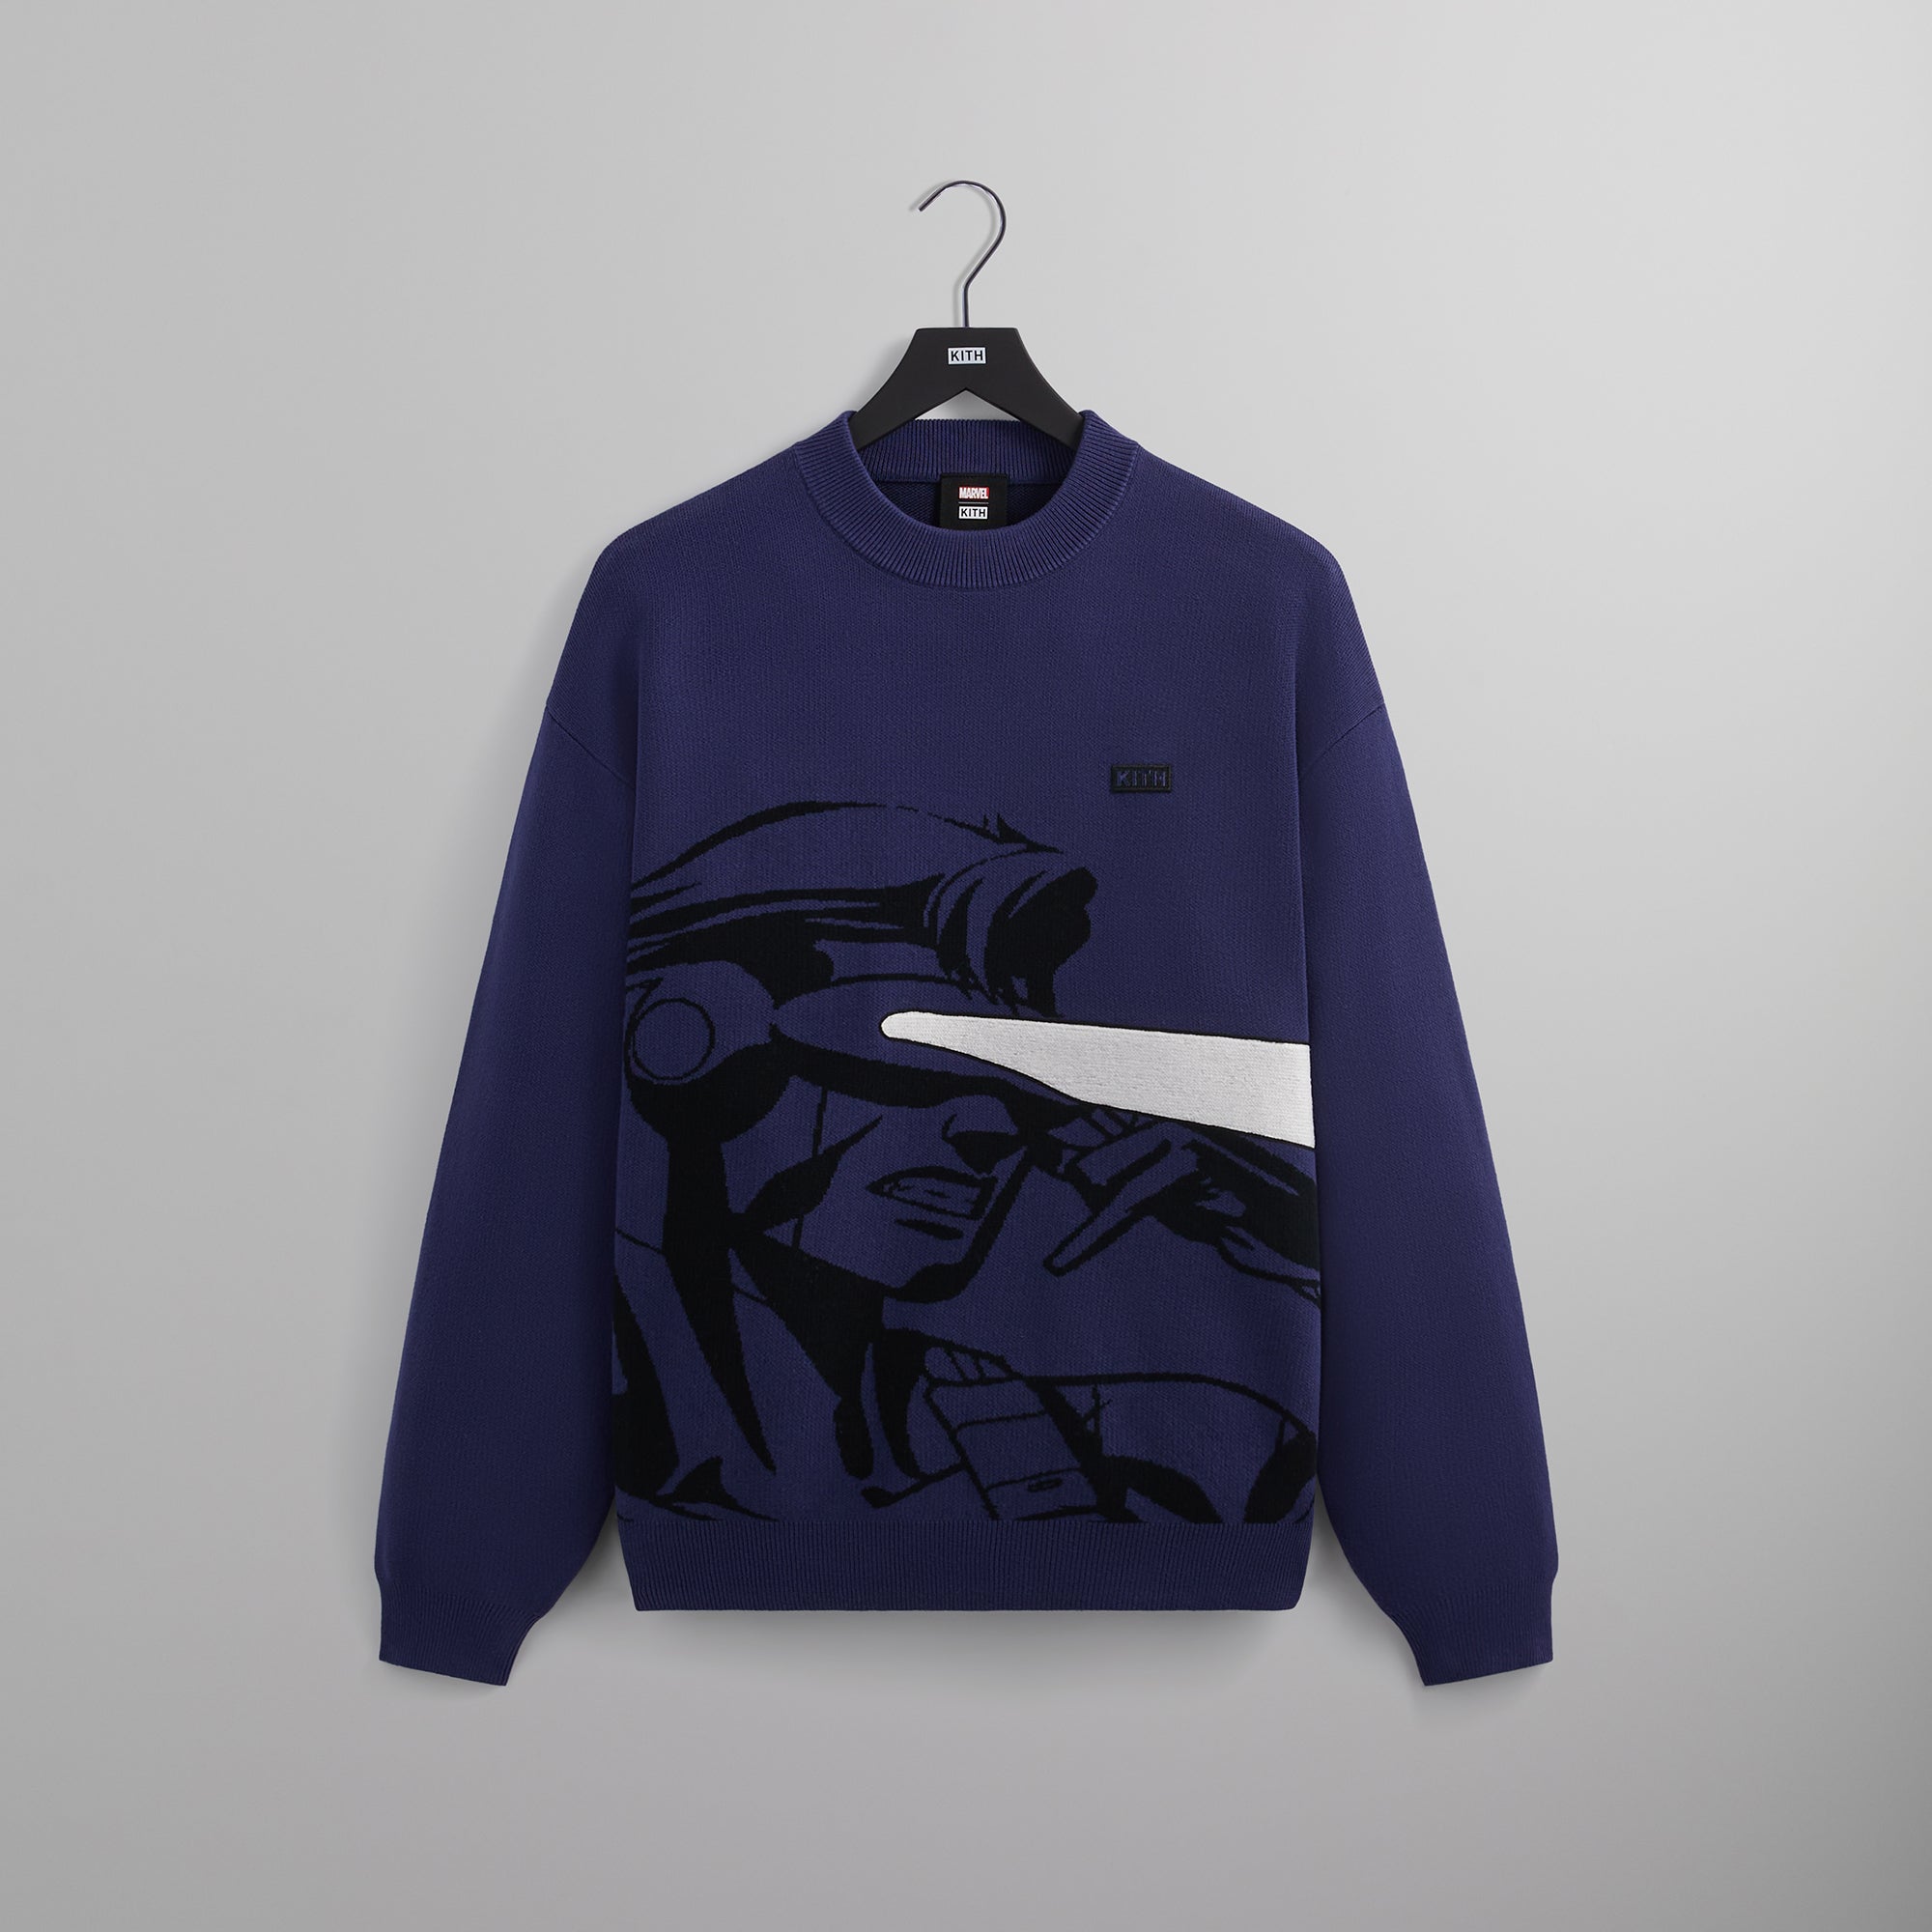 Marvel | Kith for X-Men Cyclops Crewneck - Passion